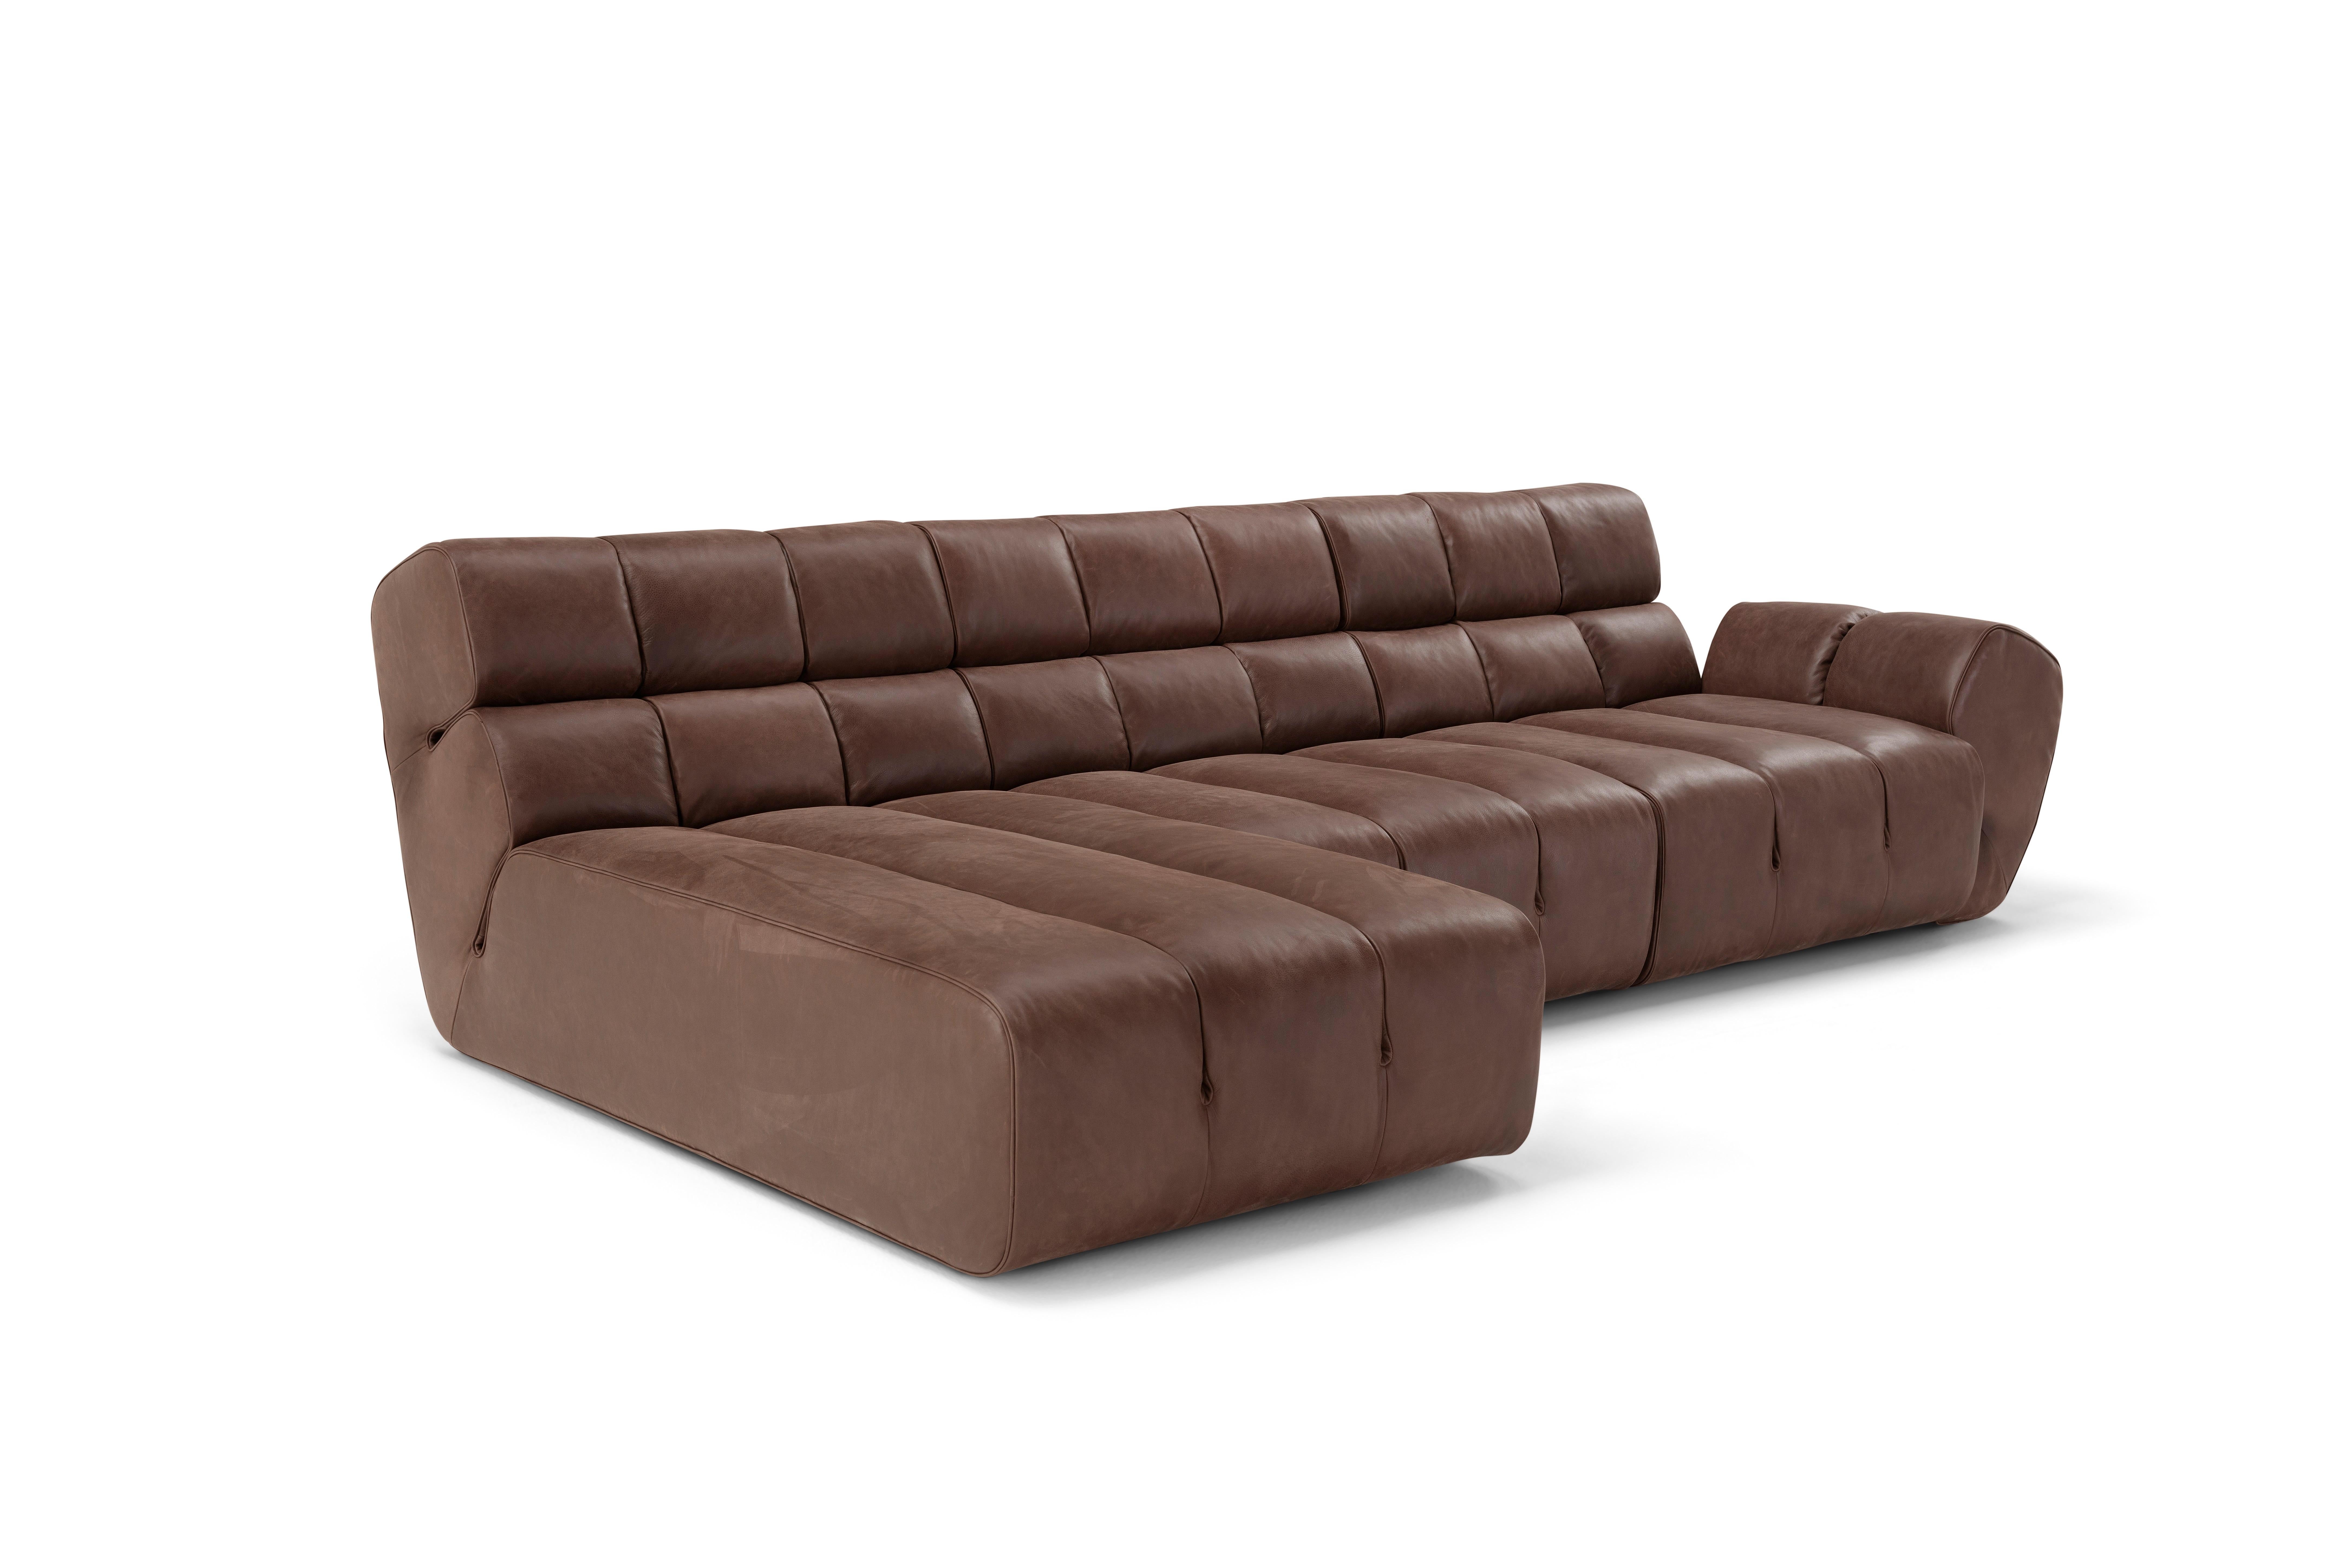 Sectional sofa Palmo by Amura Lab 
Designer: Emanuel Gargano

Model shown: Textile - Leather Old Velvet 2064

Inspired by the natural gesture of an opening hand, Palmo is the new living concept designed by Emanuel Gargano.
The leather folds